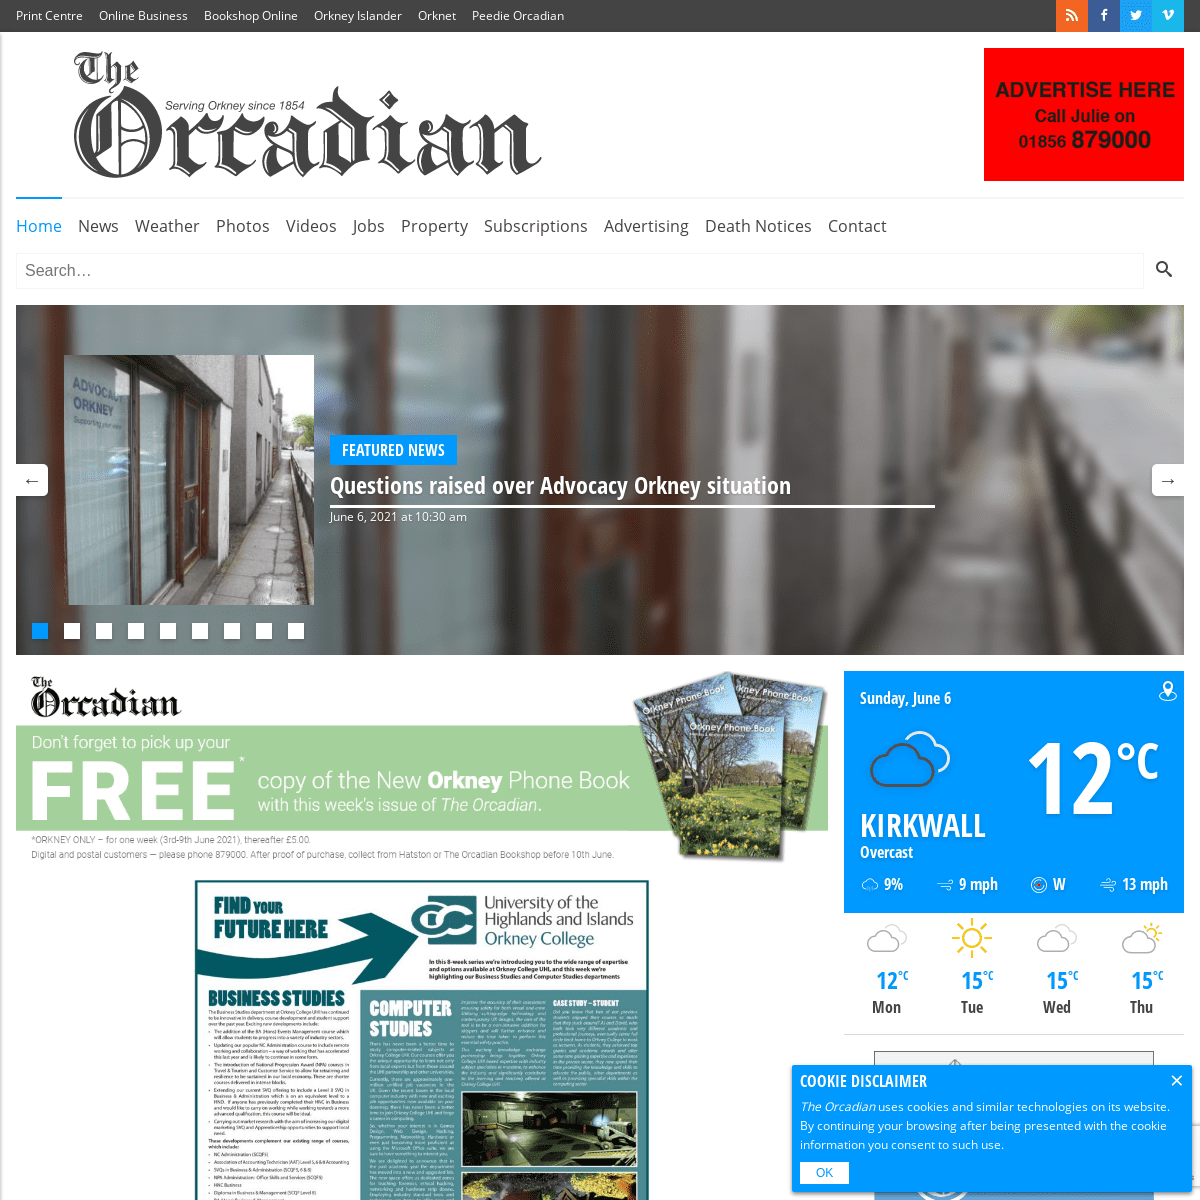 A complete backup of https://orcadian.co.uk